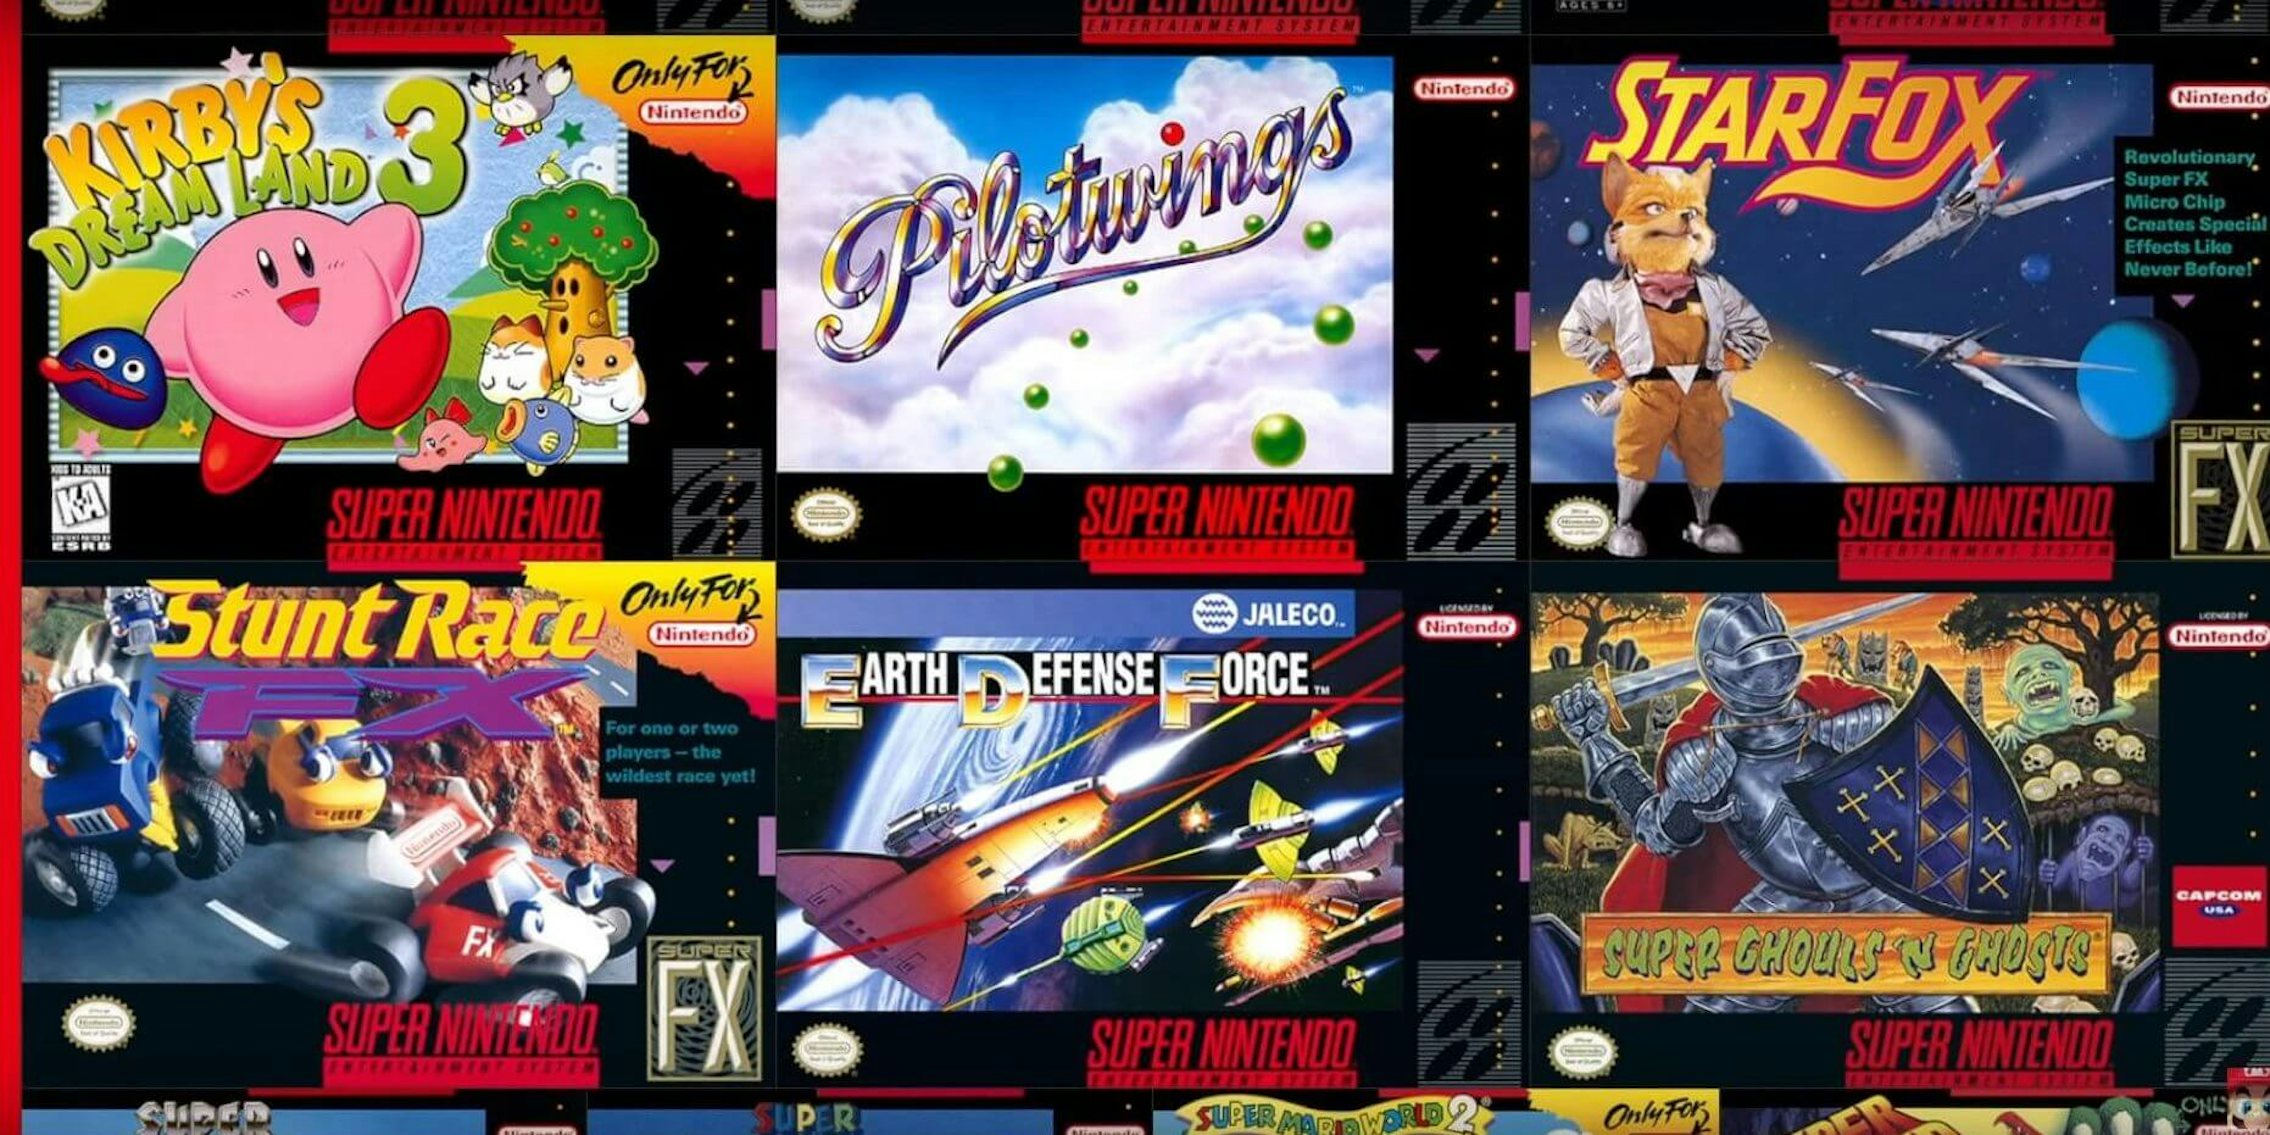 The Best SNES Games on Nintendo Switch Online You Really Must Play